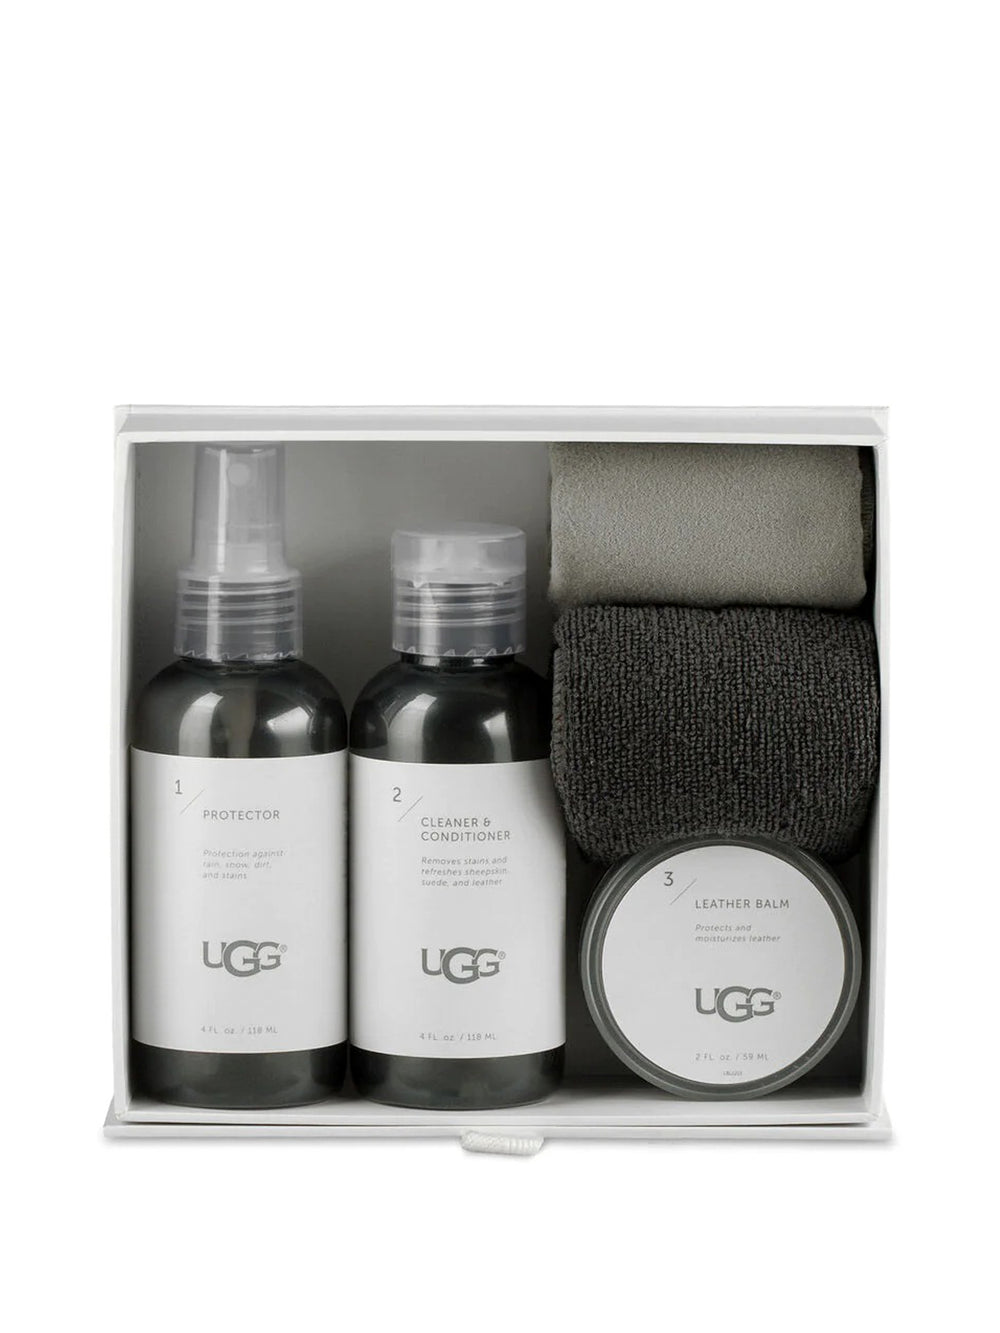 UGG LEATHER CARE KIT - CLEARANCE